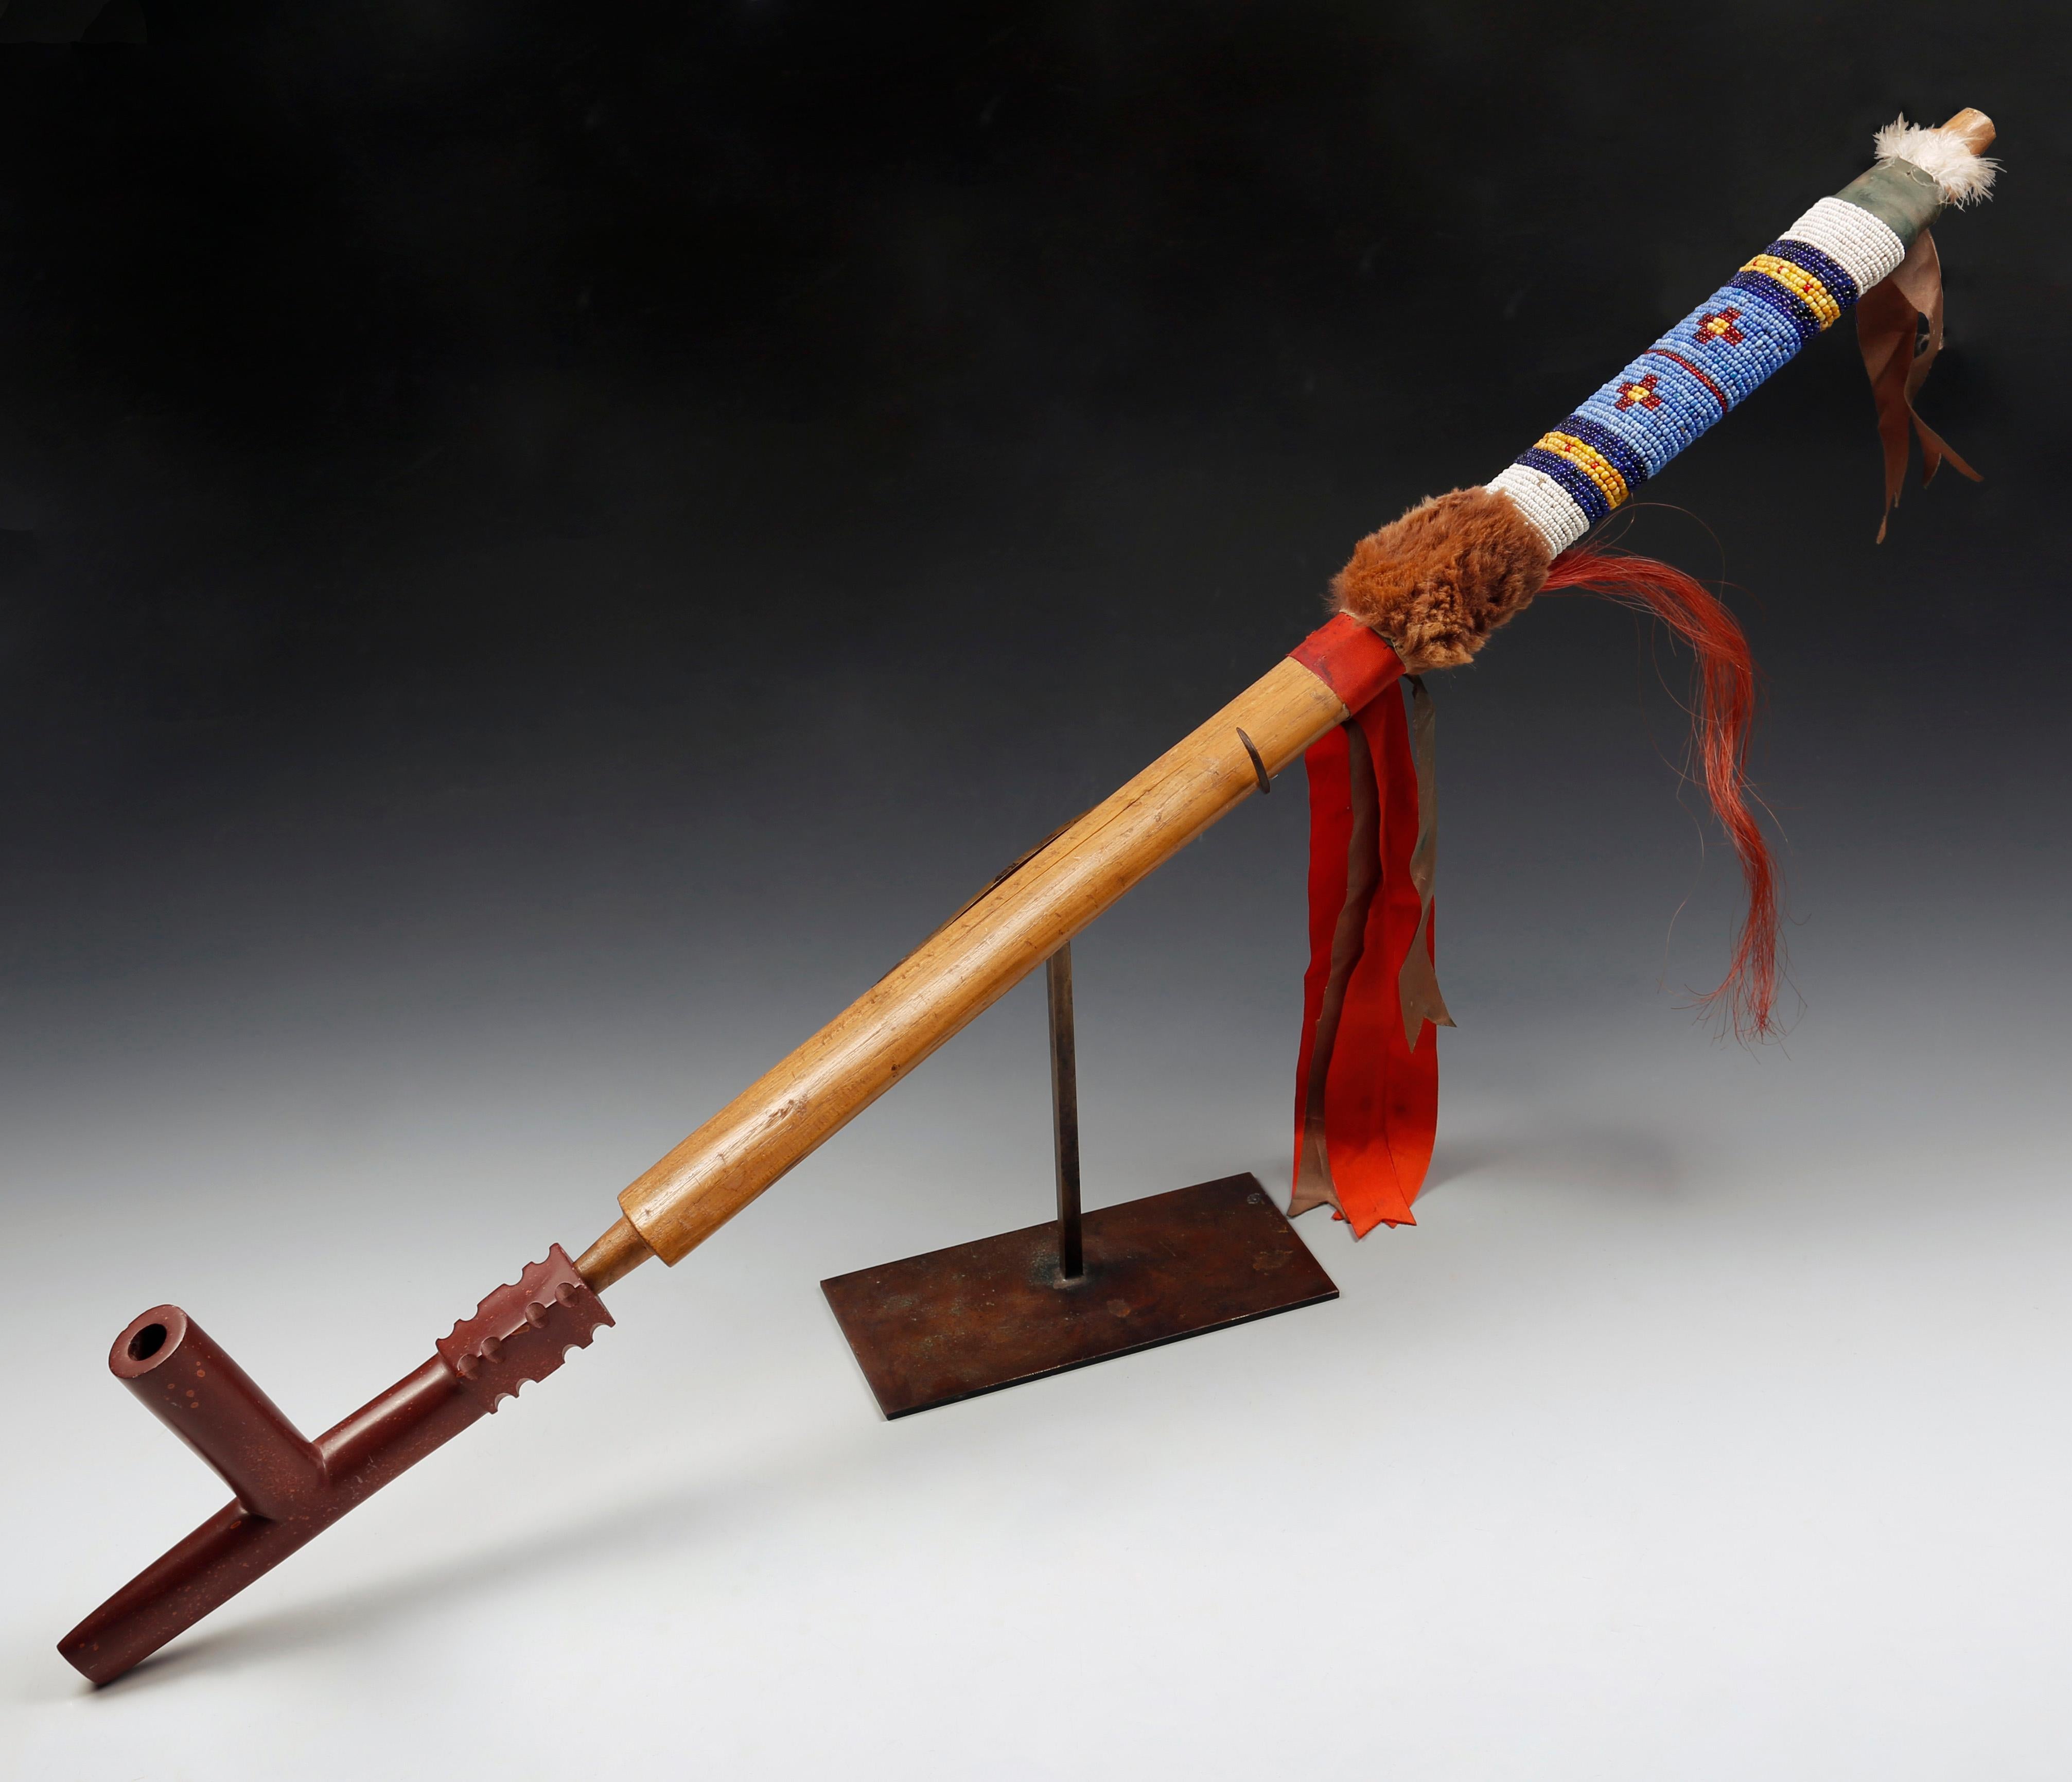 A Native American Indian Sioux beaded wood and caitlinite pipe
A fine Sioux pipe with a T shape catlinite bowl notched block end,
the elliptical wood shaft bound with colored glass beads, fur, feathers, dyed horse hair and ribbons,
81 cm, 32 inches